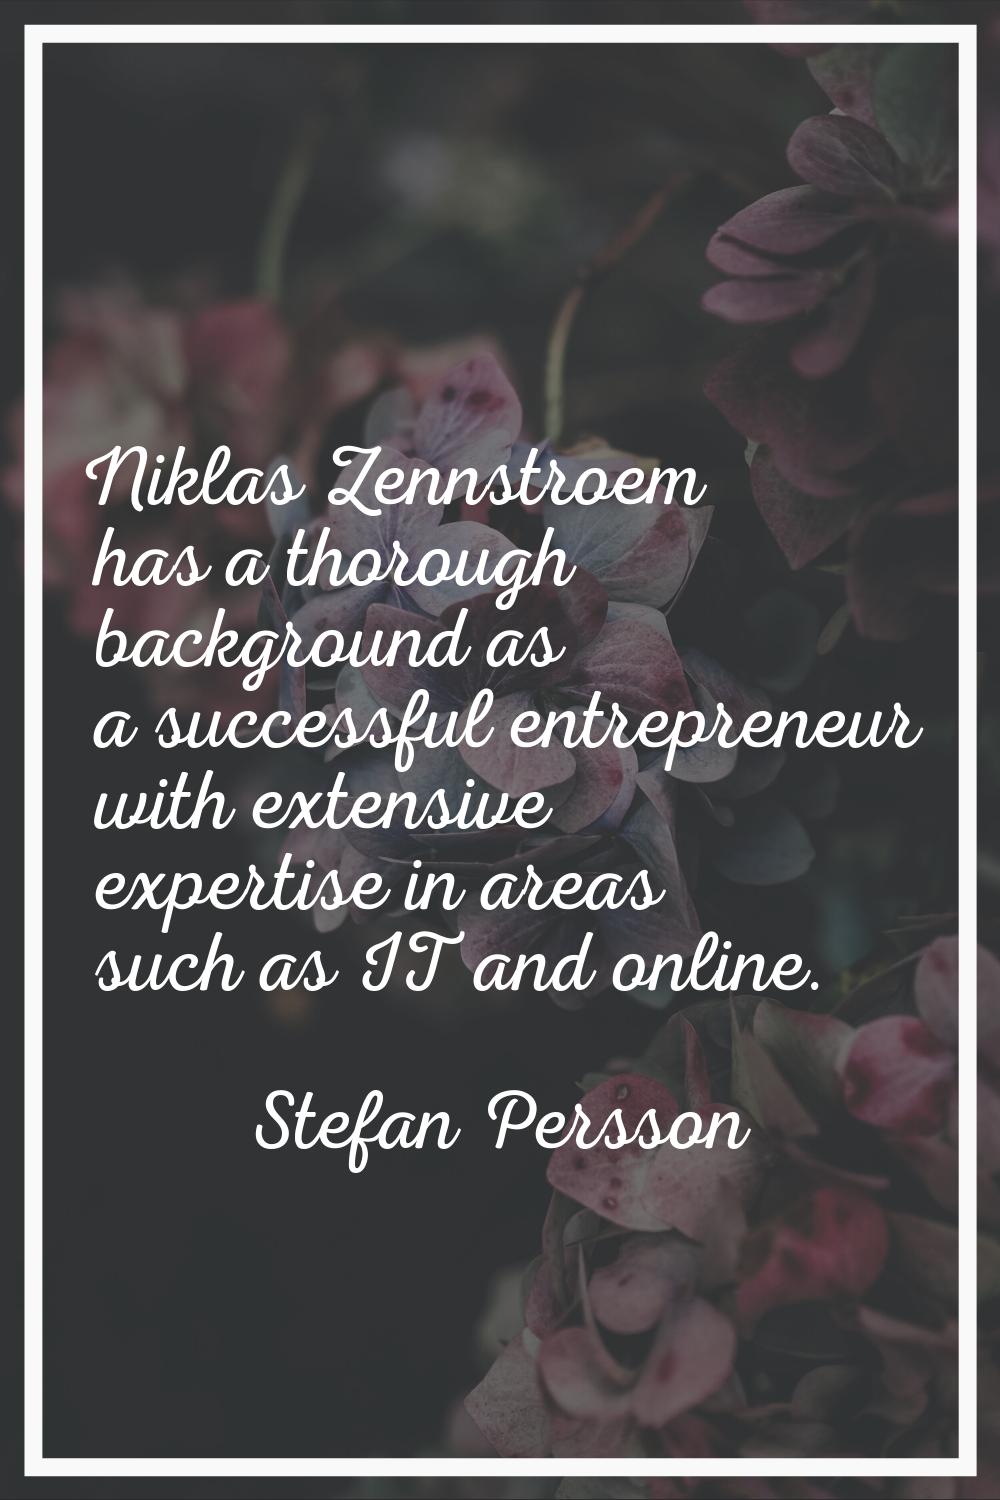 Niklas Zennstroem has a thorough background as a successful entrepreneur with extensive expertise i